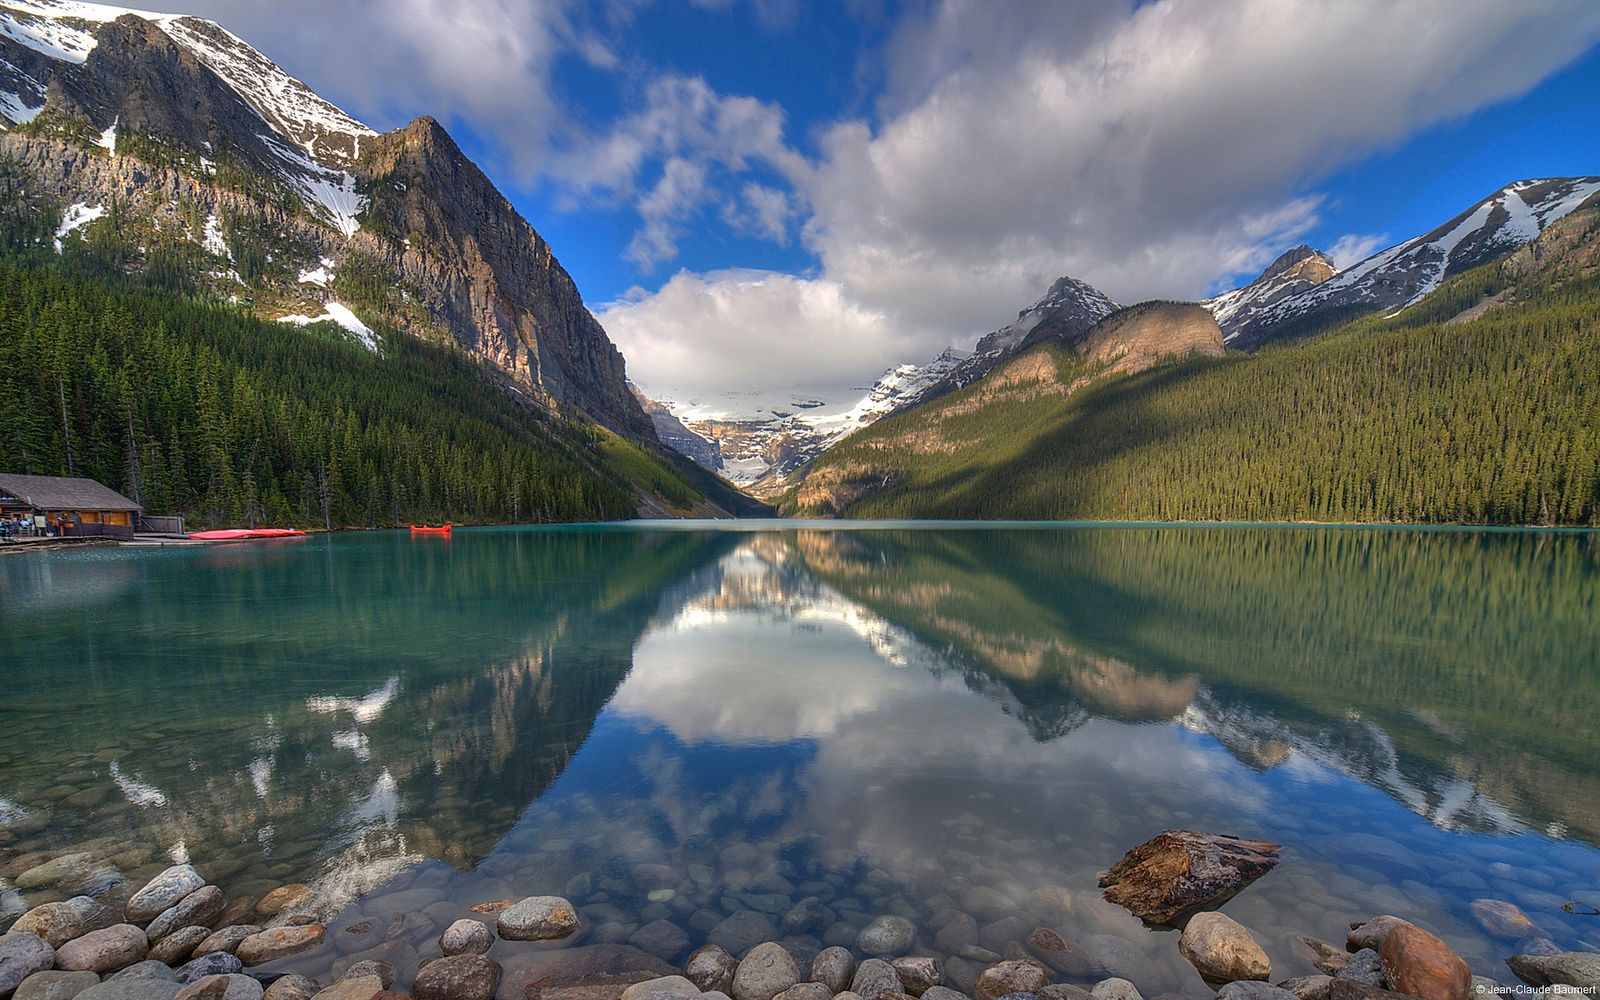 How to Plan a Trip to Banff to Get a Load of These Views